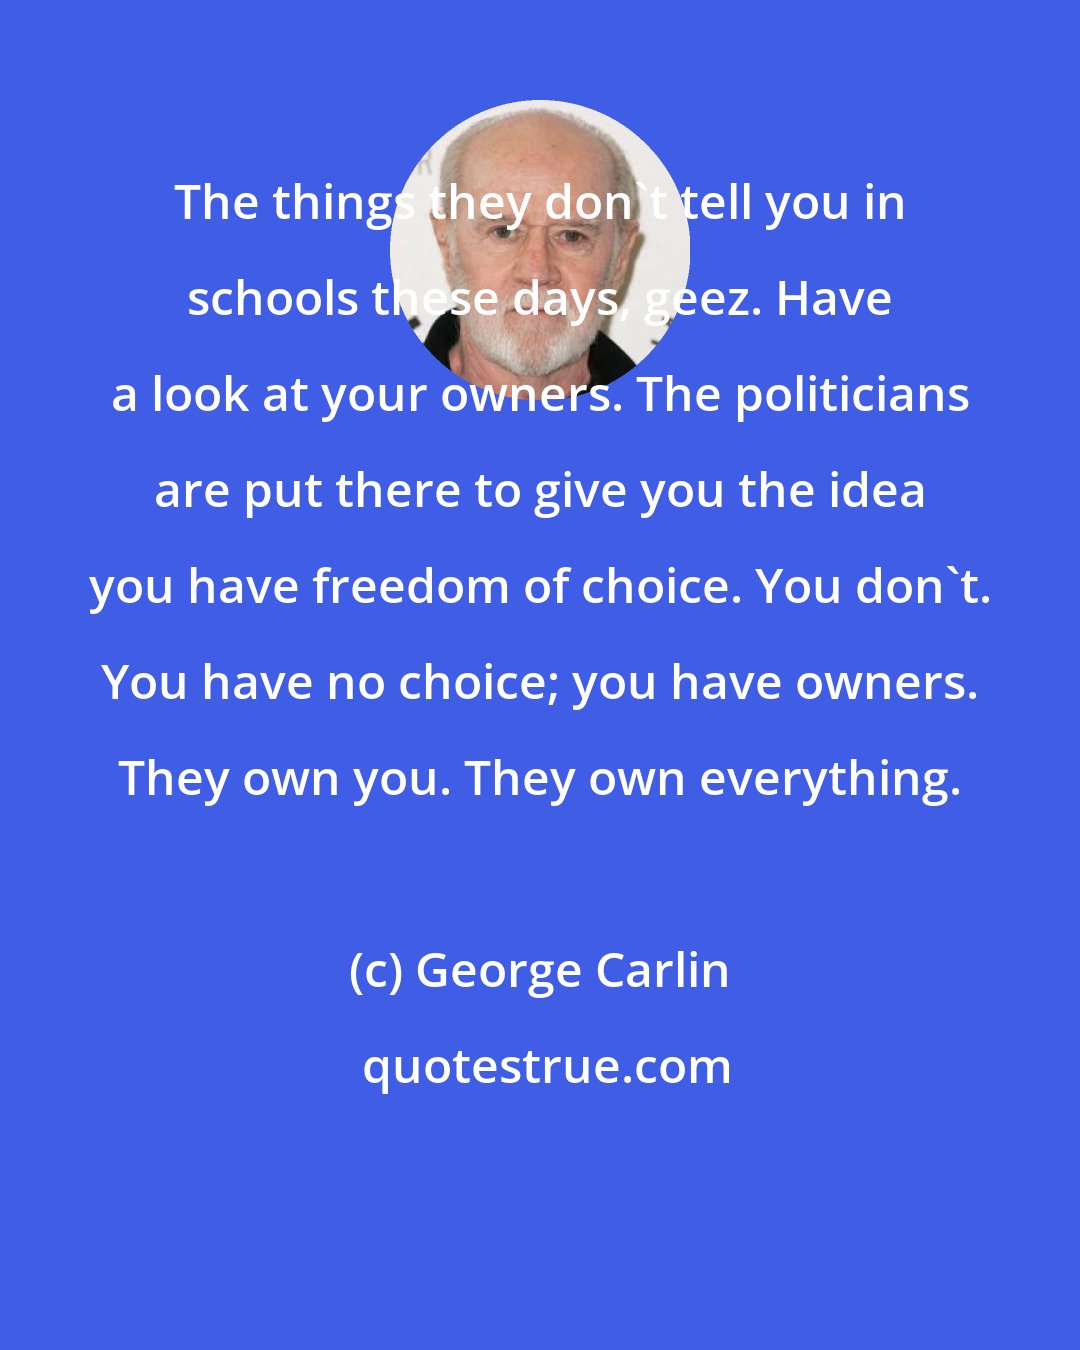 George Carlin: The things they don't tell you in schools these days, geez. Have a look at your owners. The politicians are put there to give you the idea you have freedom of choice. You don't. You have no choice; you have owners. They own you. They own everything.